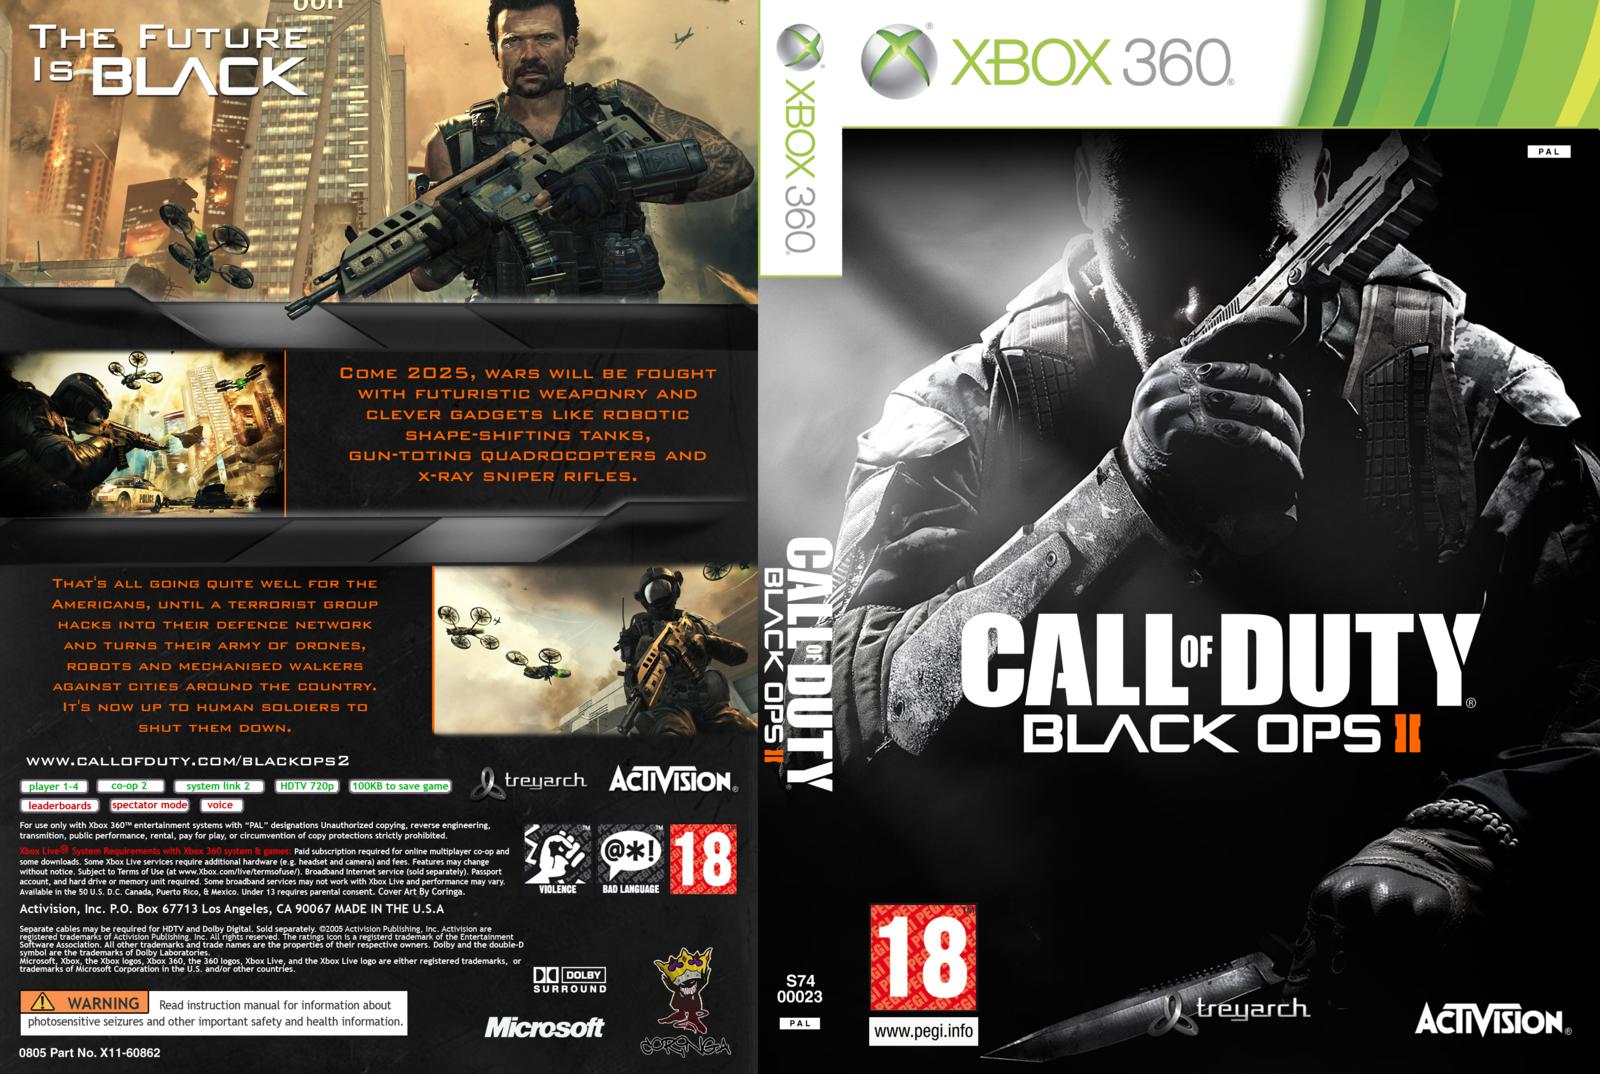 Xbox games download. Black ops Xbox 360. Call of Duty Black ops 2 диск на иксбокс 360. Cod Black ops 2 обложка Xbox 360. Black ops 1 Xbox 360.